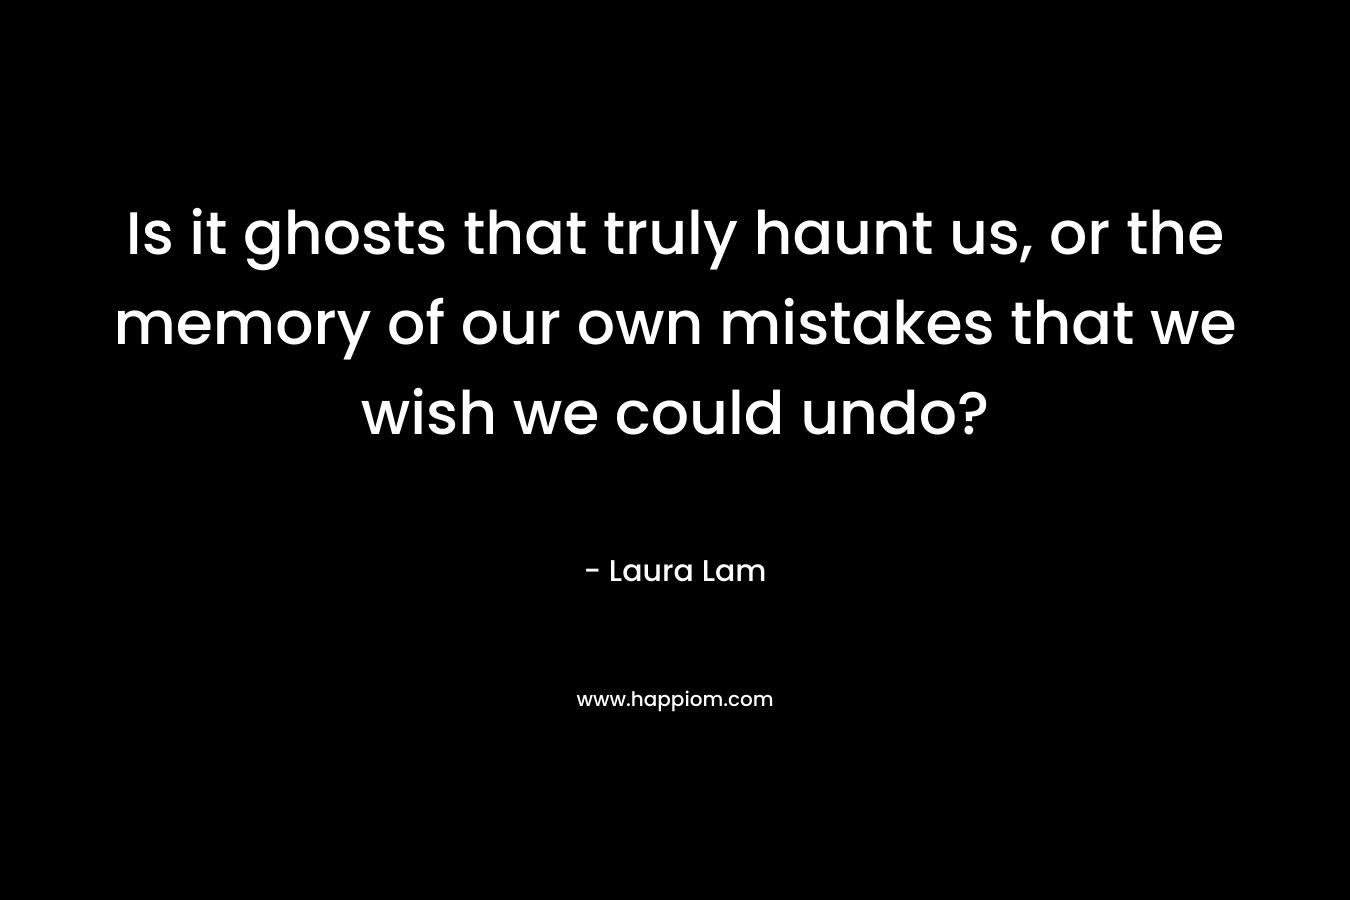 Is it ghosts that truly haunt us, or the memory of our own mistakes that we wish we could undo? – Laura Lam